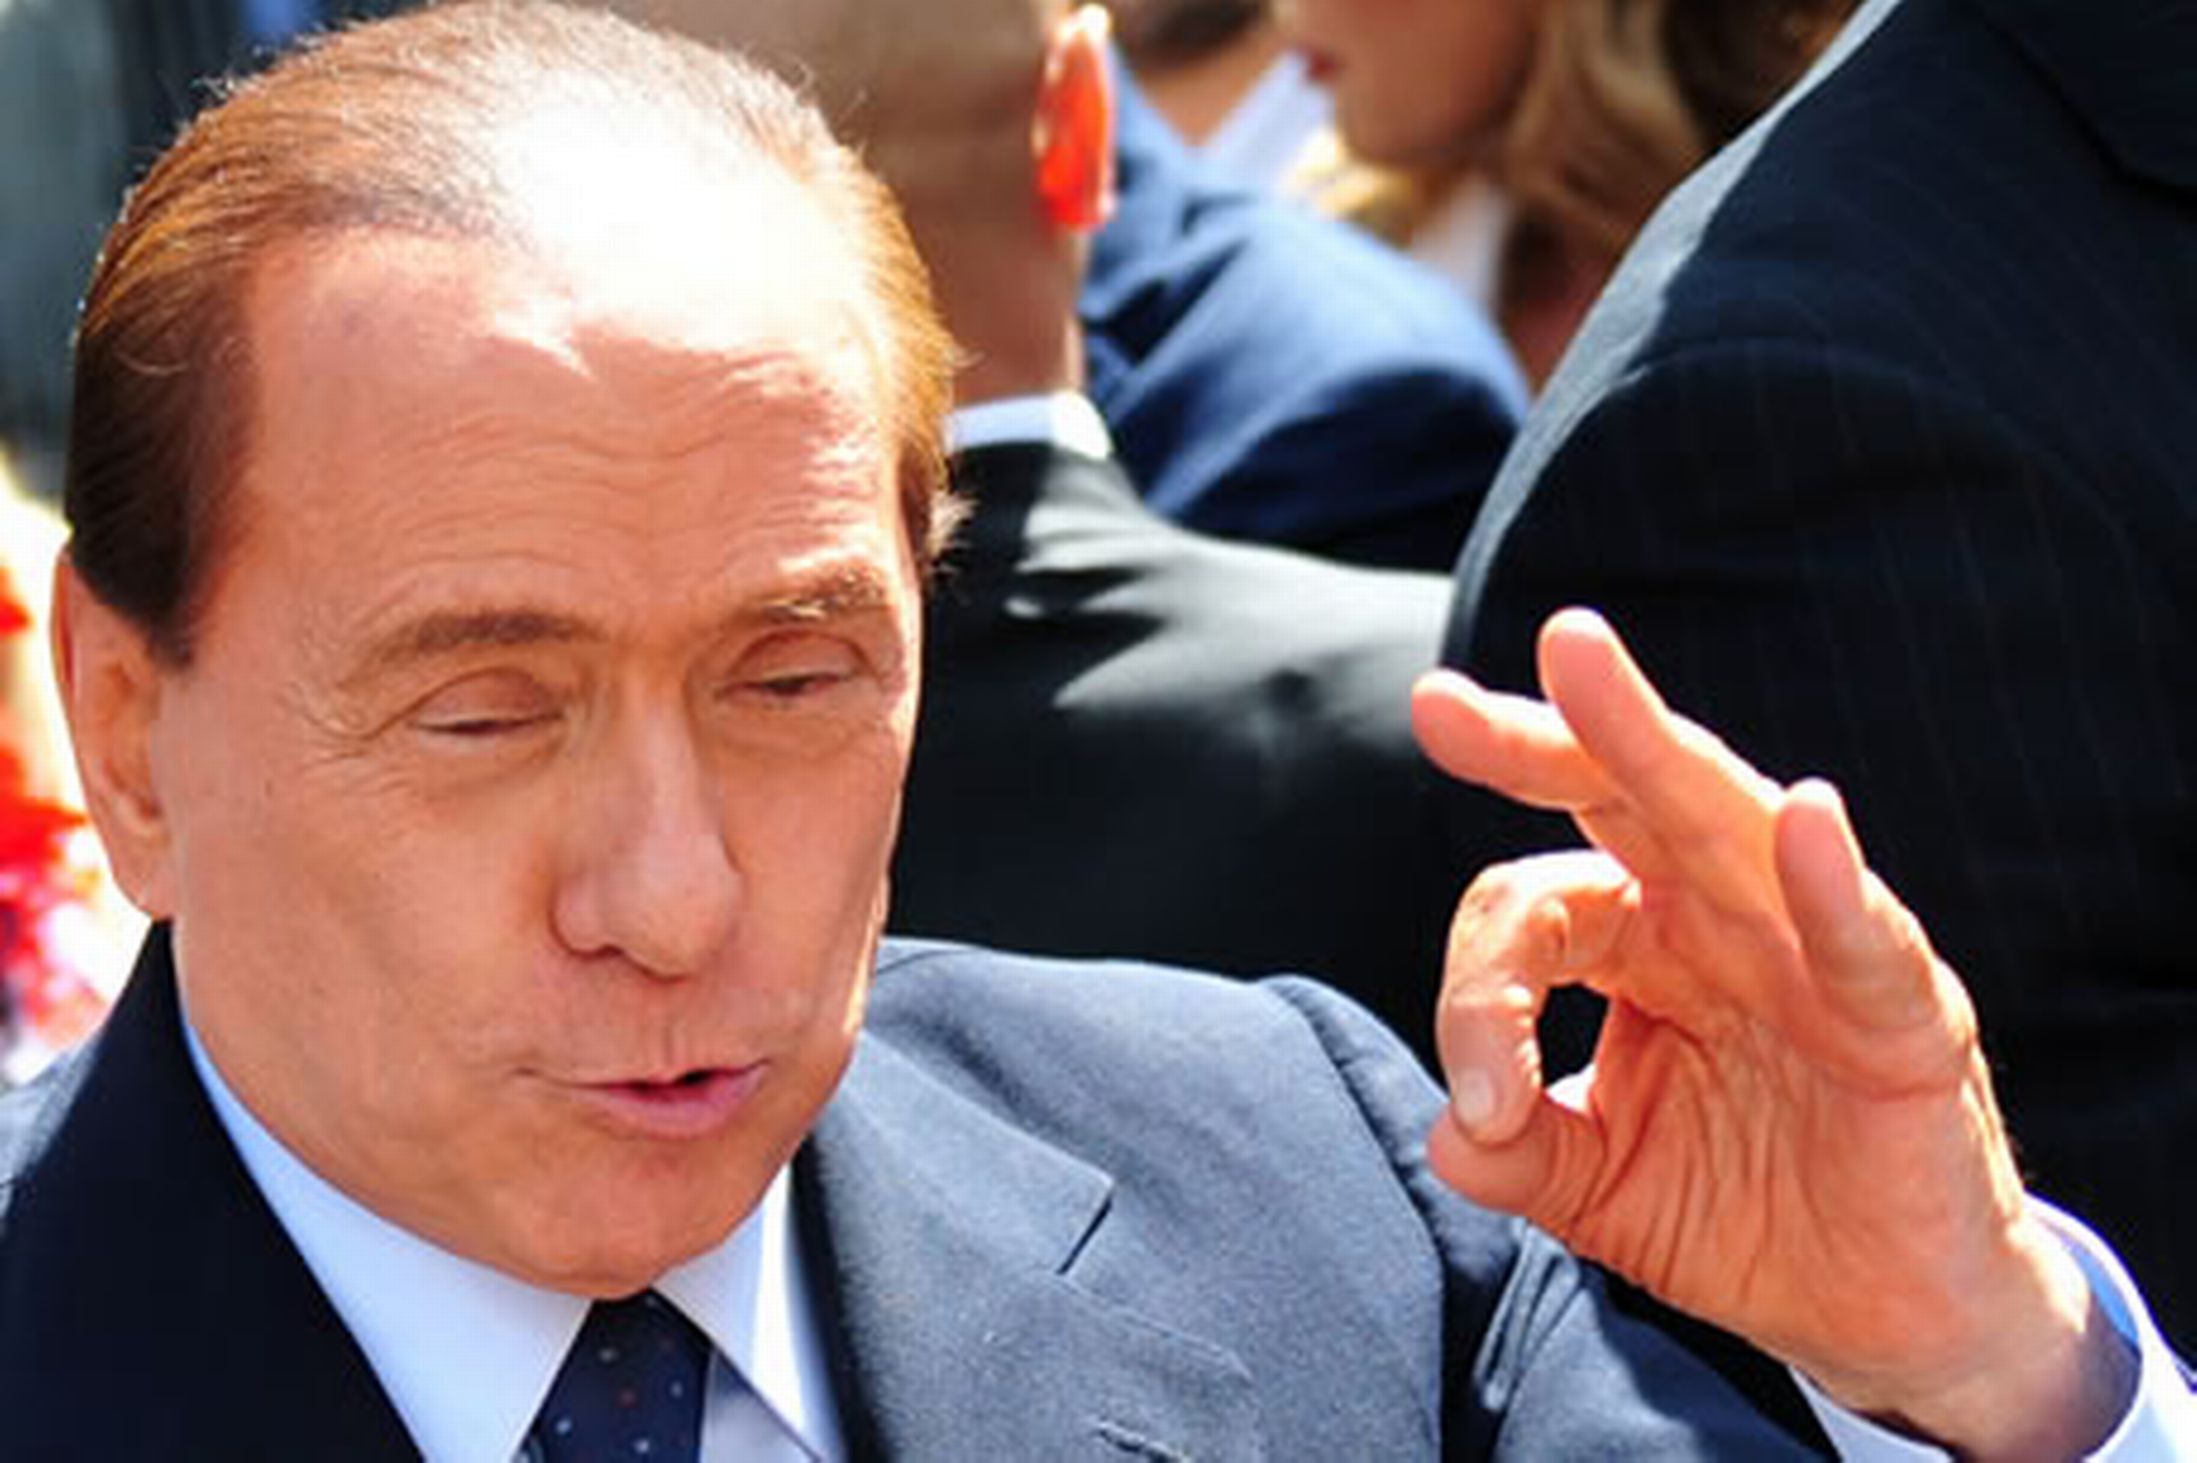 Silvio Berlusconi Will Ask for Presidential Clemency in Exchange of Four Years of Prison